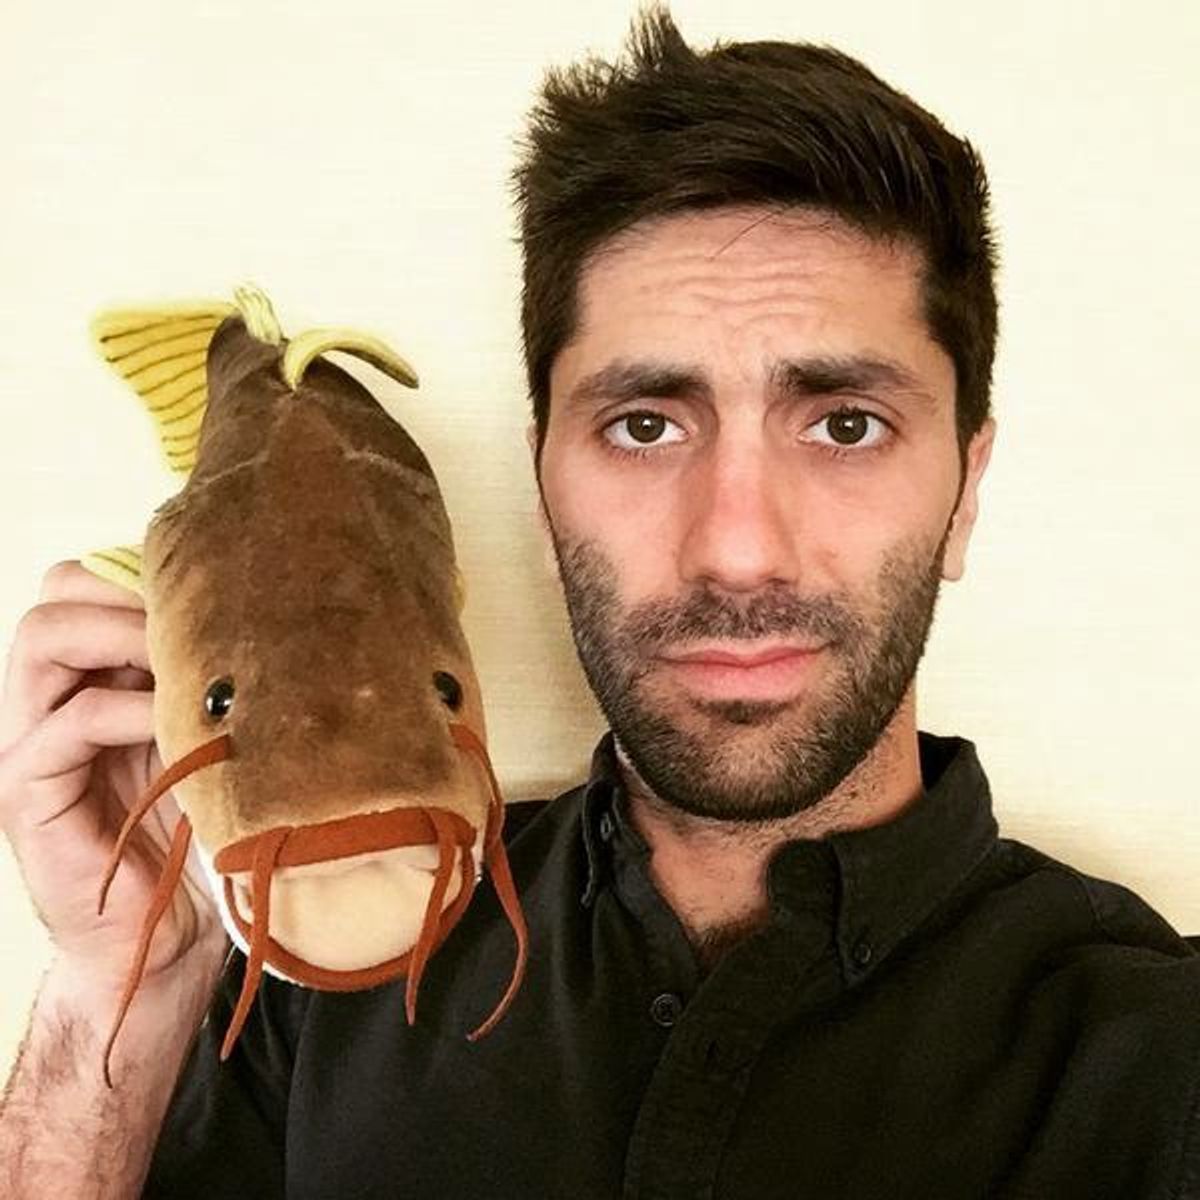 How 'Catfish' Helped Me Fight Back Against Scammers